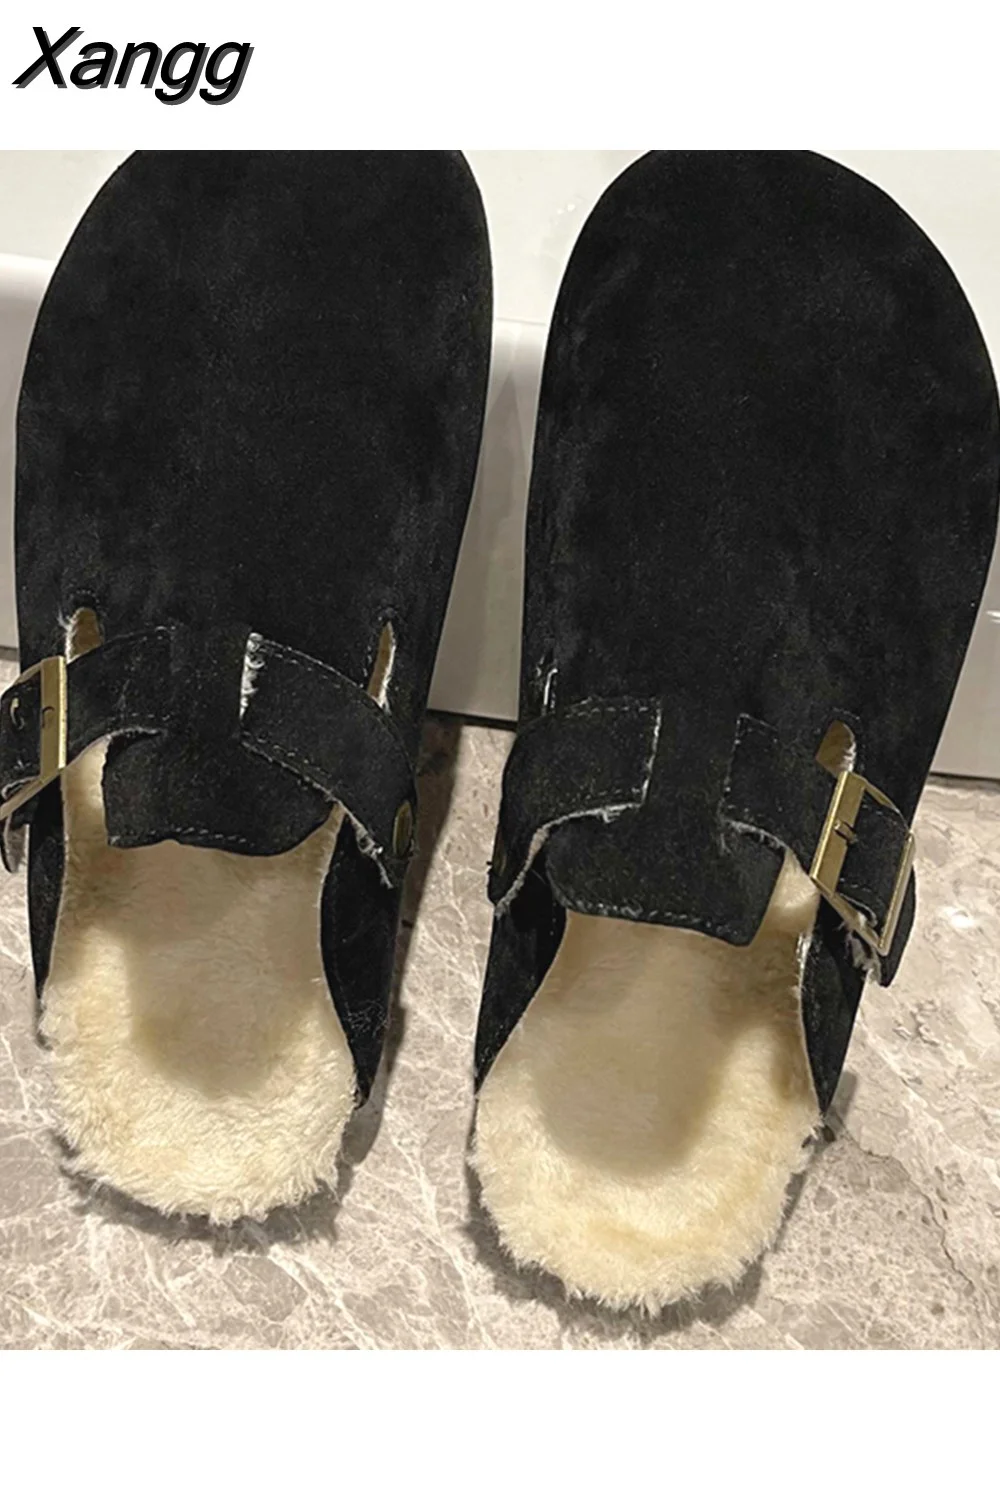 Xangg Mules Home Slippers Women New 2023 Winter Flip Flops Indoor Fur Round Toe Slides Female Shoes Casual Outside Warm Flats